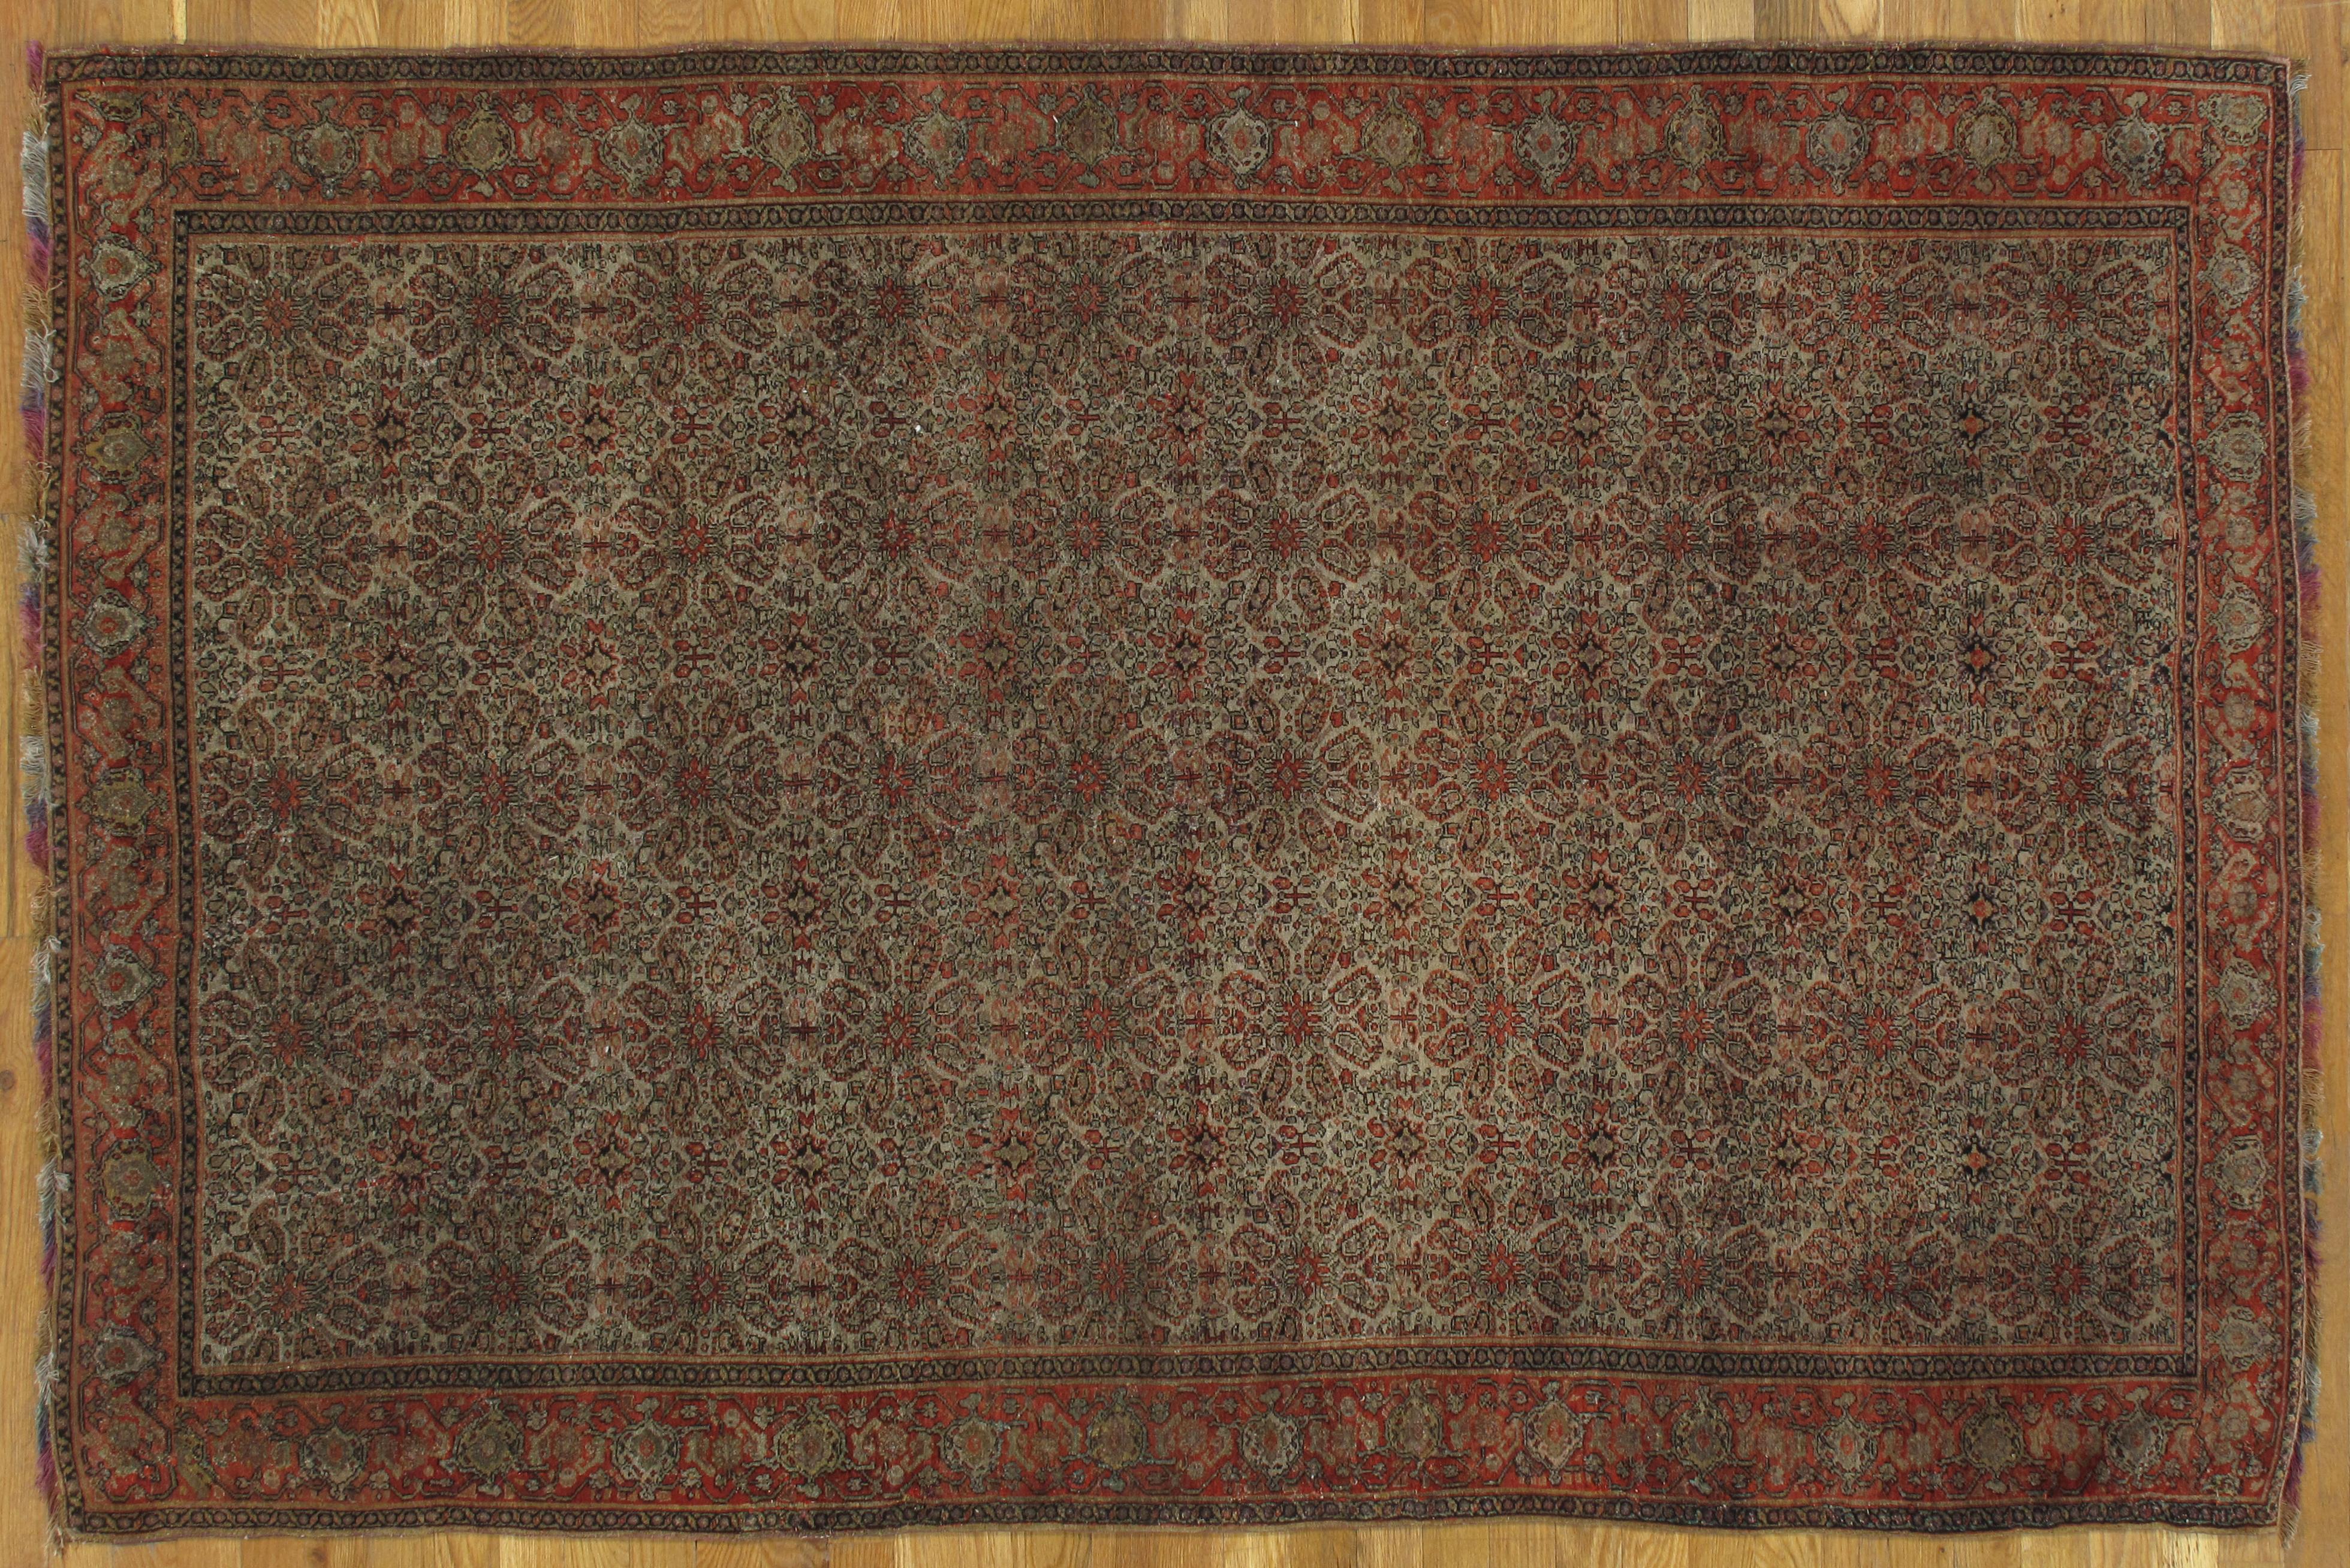 19th Century Antique Senneh Rug with Multicolored Silk Warp, Handmade, Fine Ivory, Red, Blue For Sale